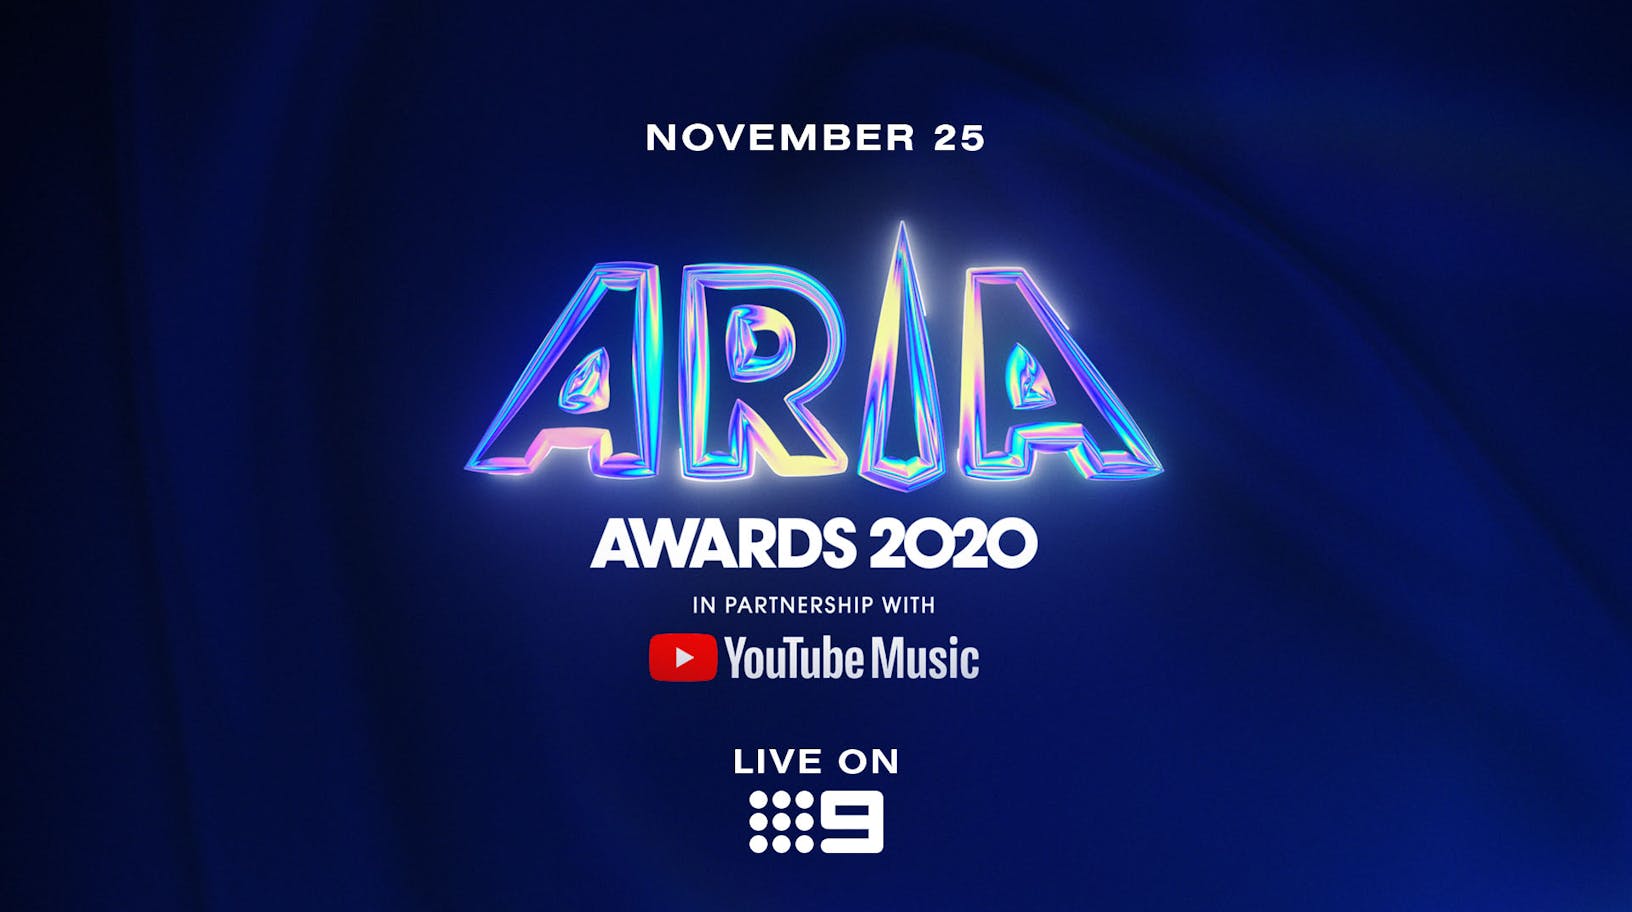 2020 ARIA Awards In Partnership With YouTube Music returns in November